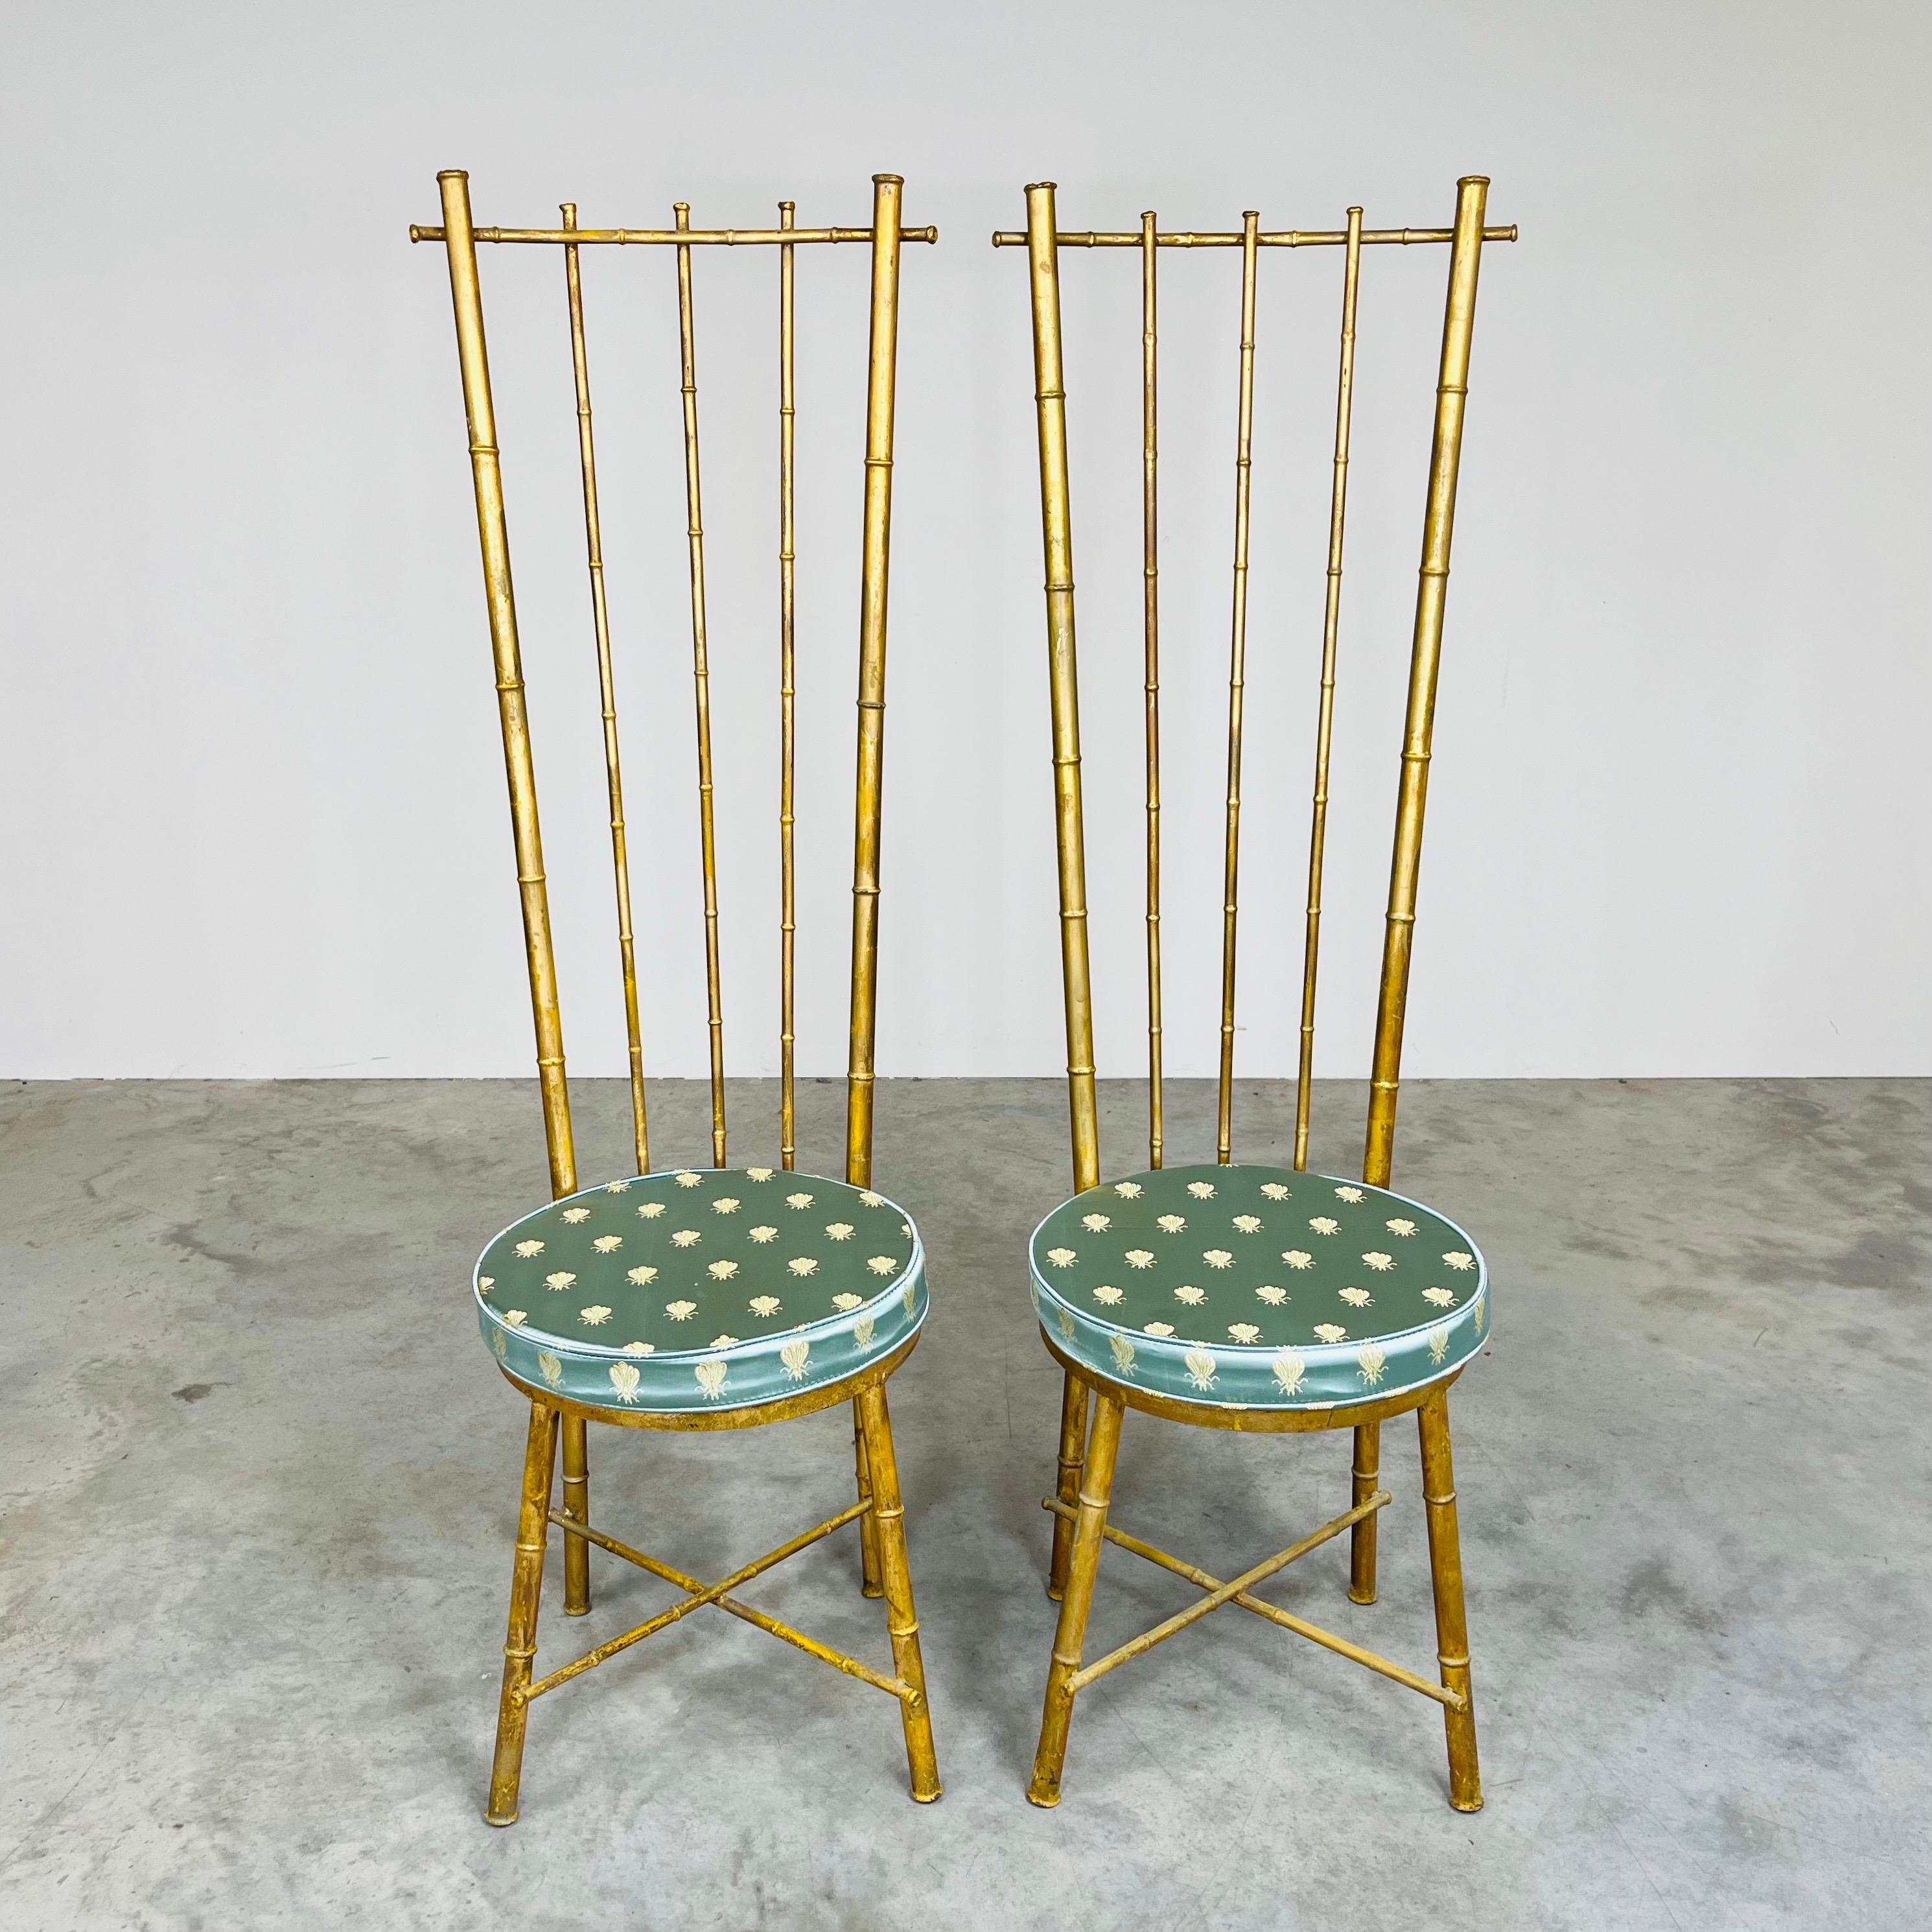 American Vintage Pair Of Hollywood Regency Gold Gilt Metal Faux Bamboo High Back Chairs For Sale